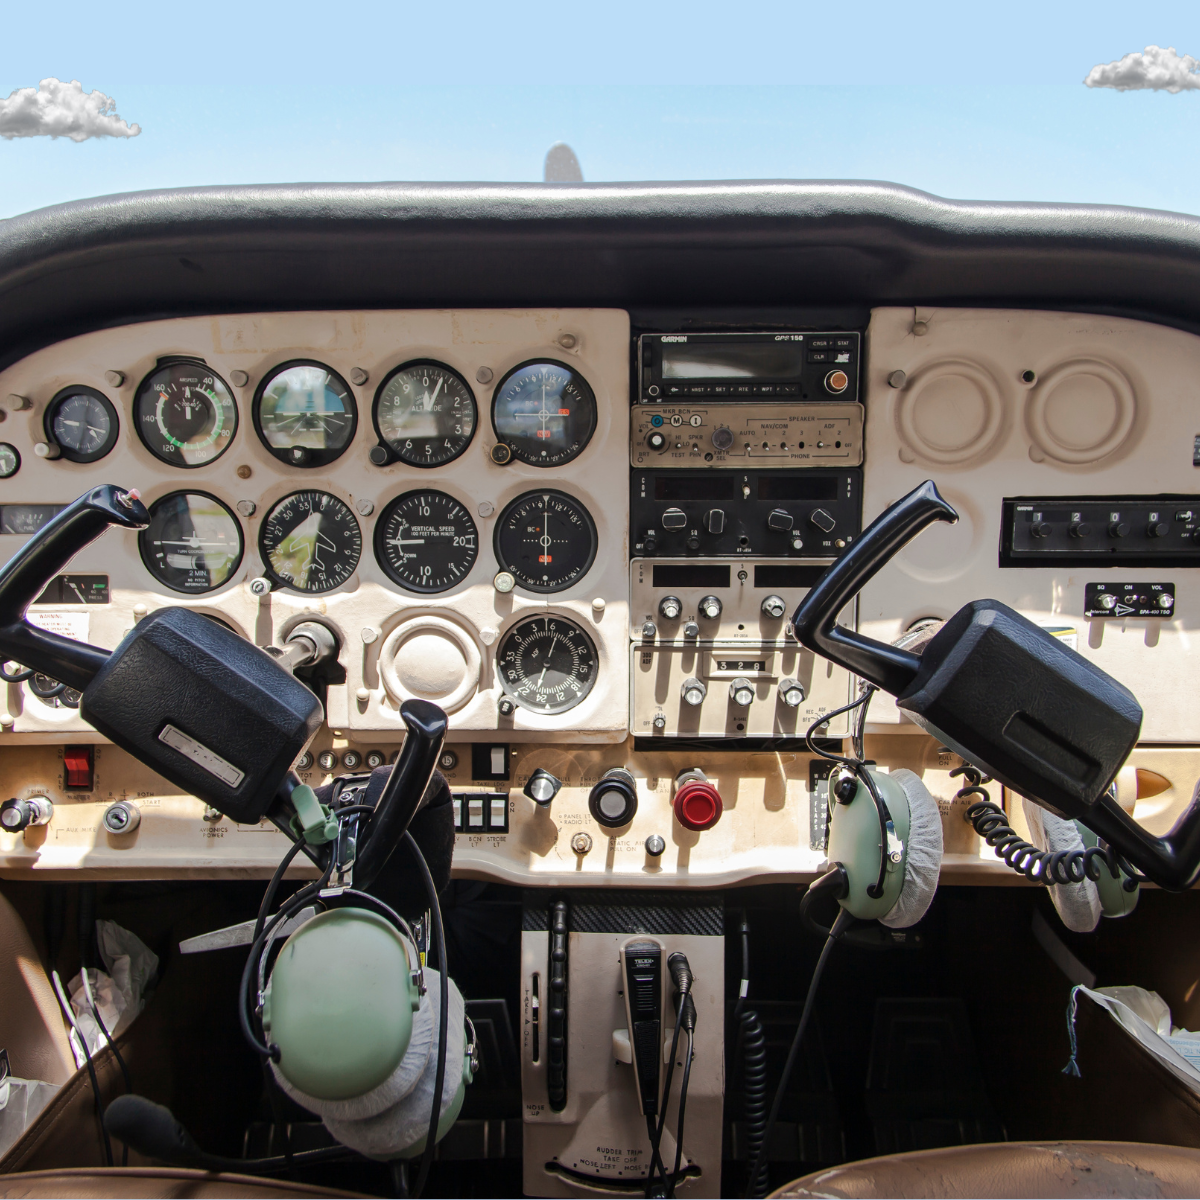 The cockpit of an airplane running on autopilot compared to outsourced IT services running on autopilot